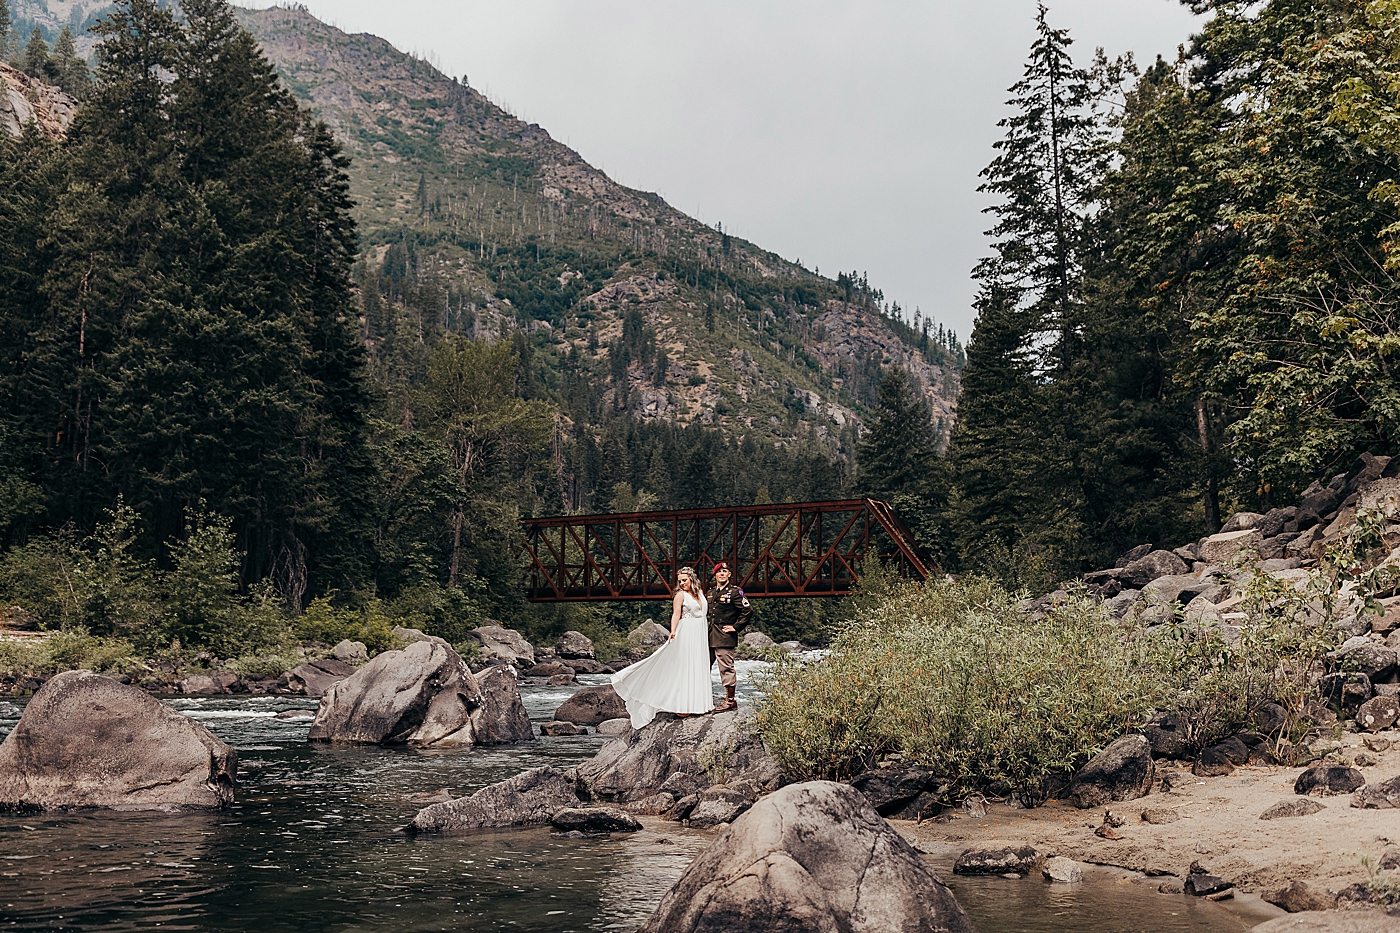 Couple standing by the water for portraits during elopement in Leavenworth, WA. Photo by Megan Montalvo Photography.